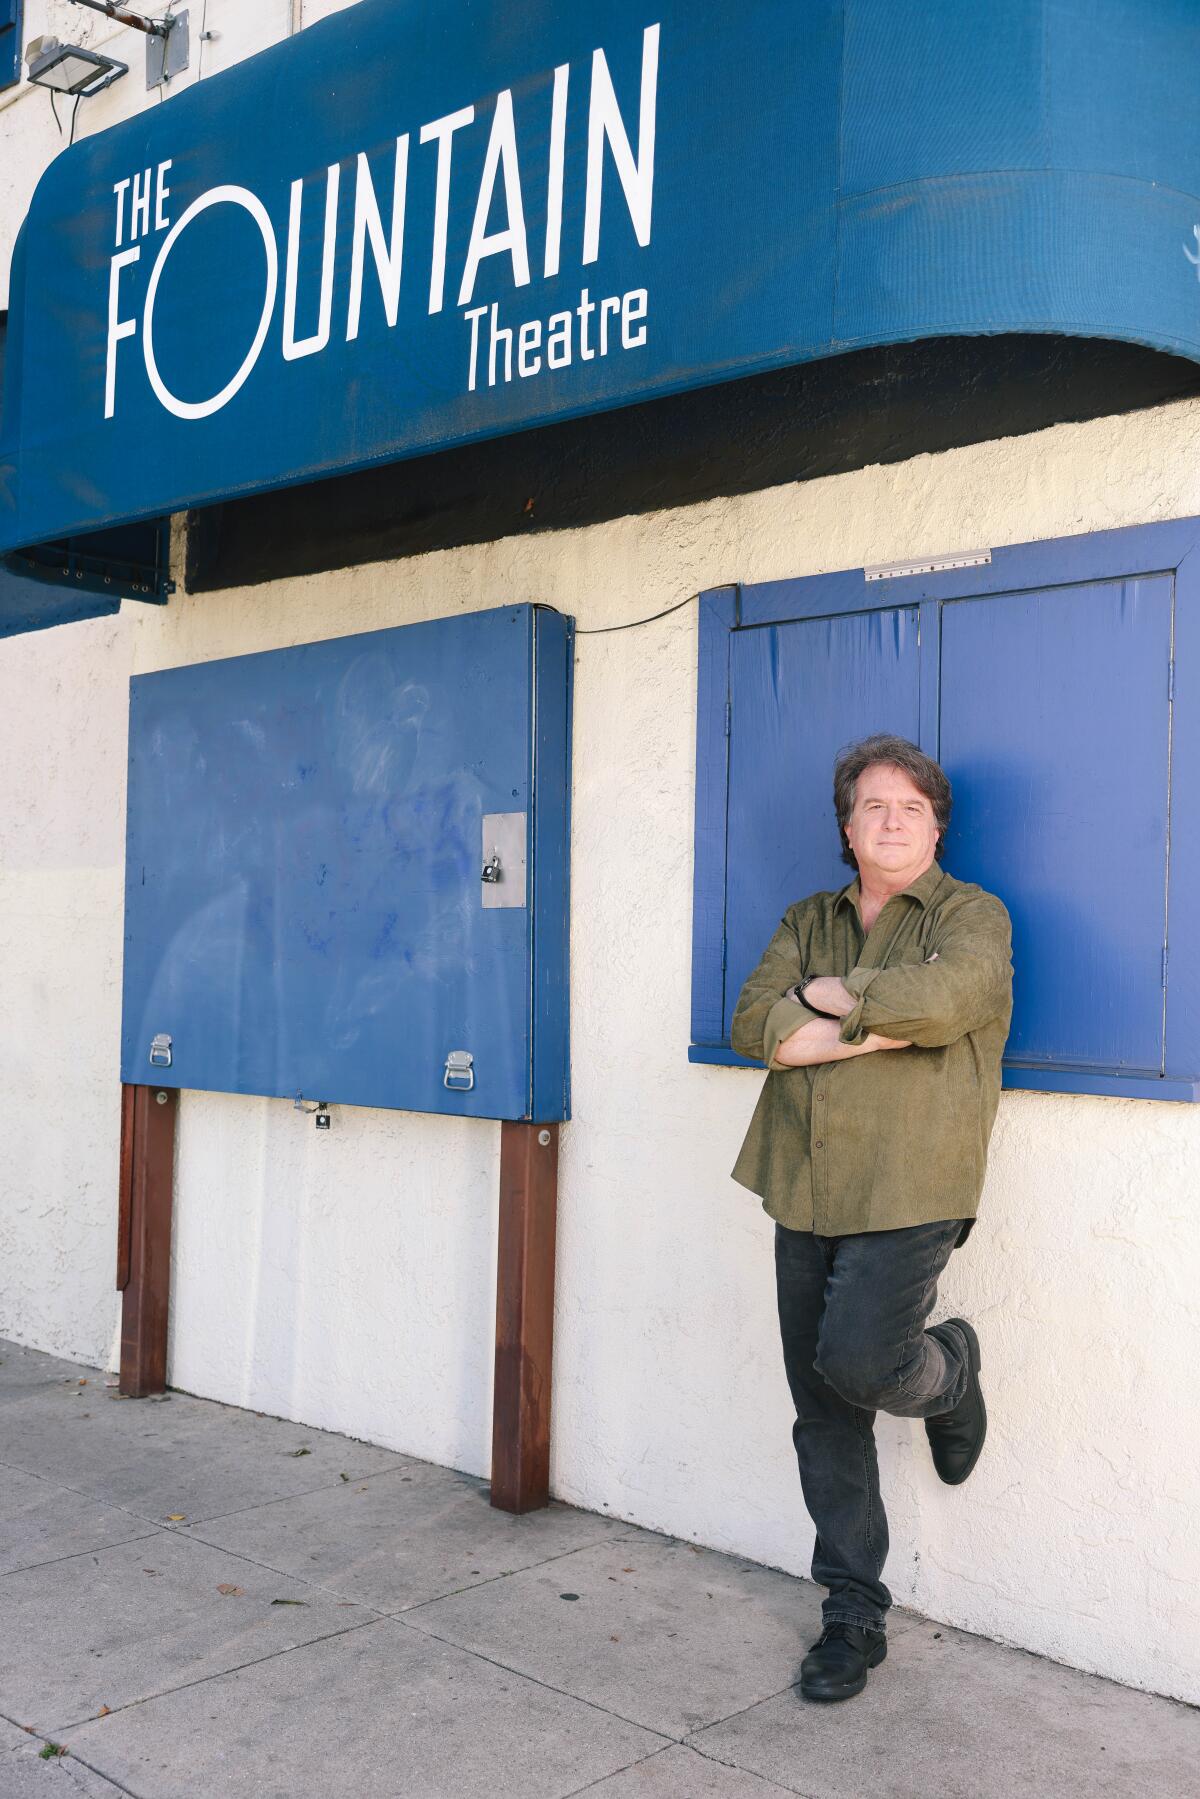 Stephen Sachs, in an olive shirt, stands underneath the blue marquee of the Fountain Theatre.